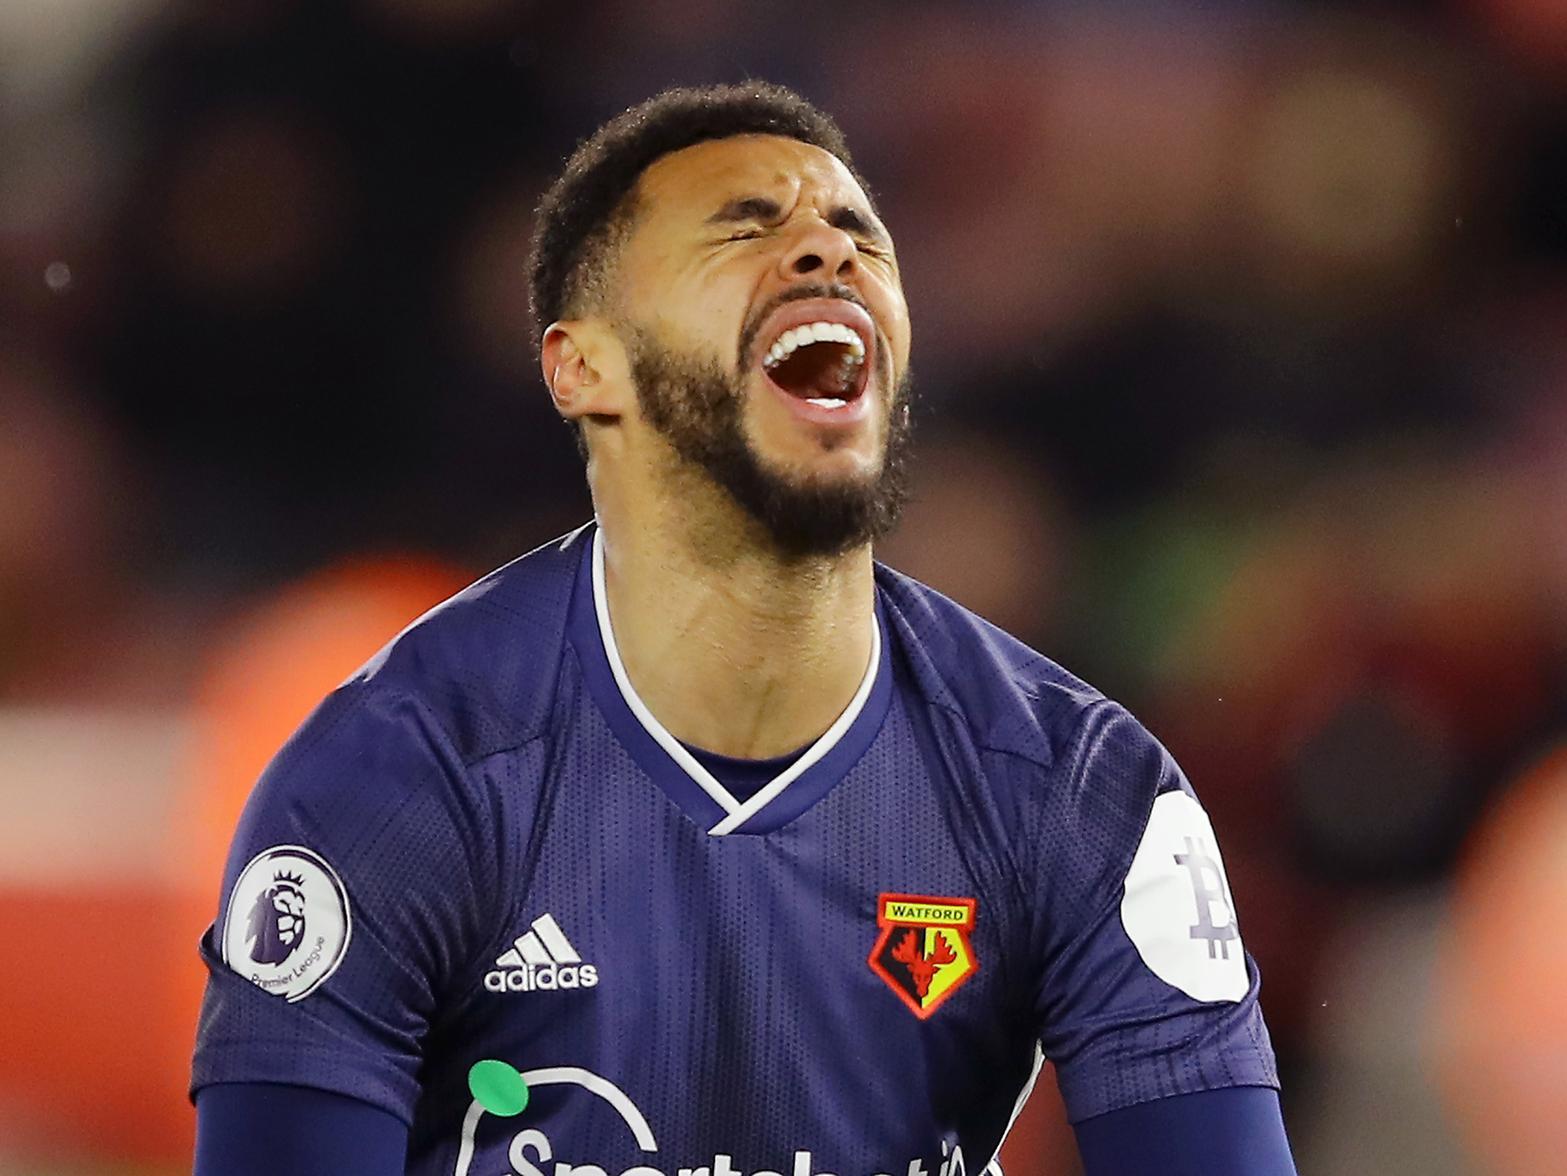 Nottingham Forest have emerged as potential rivals to Leeds United for Watford striker Andre Gray, after missing out on Arsenal's Eddie Nketiah who is set to remain with the Gunners for now. (Evening Standard)